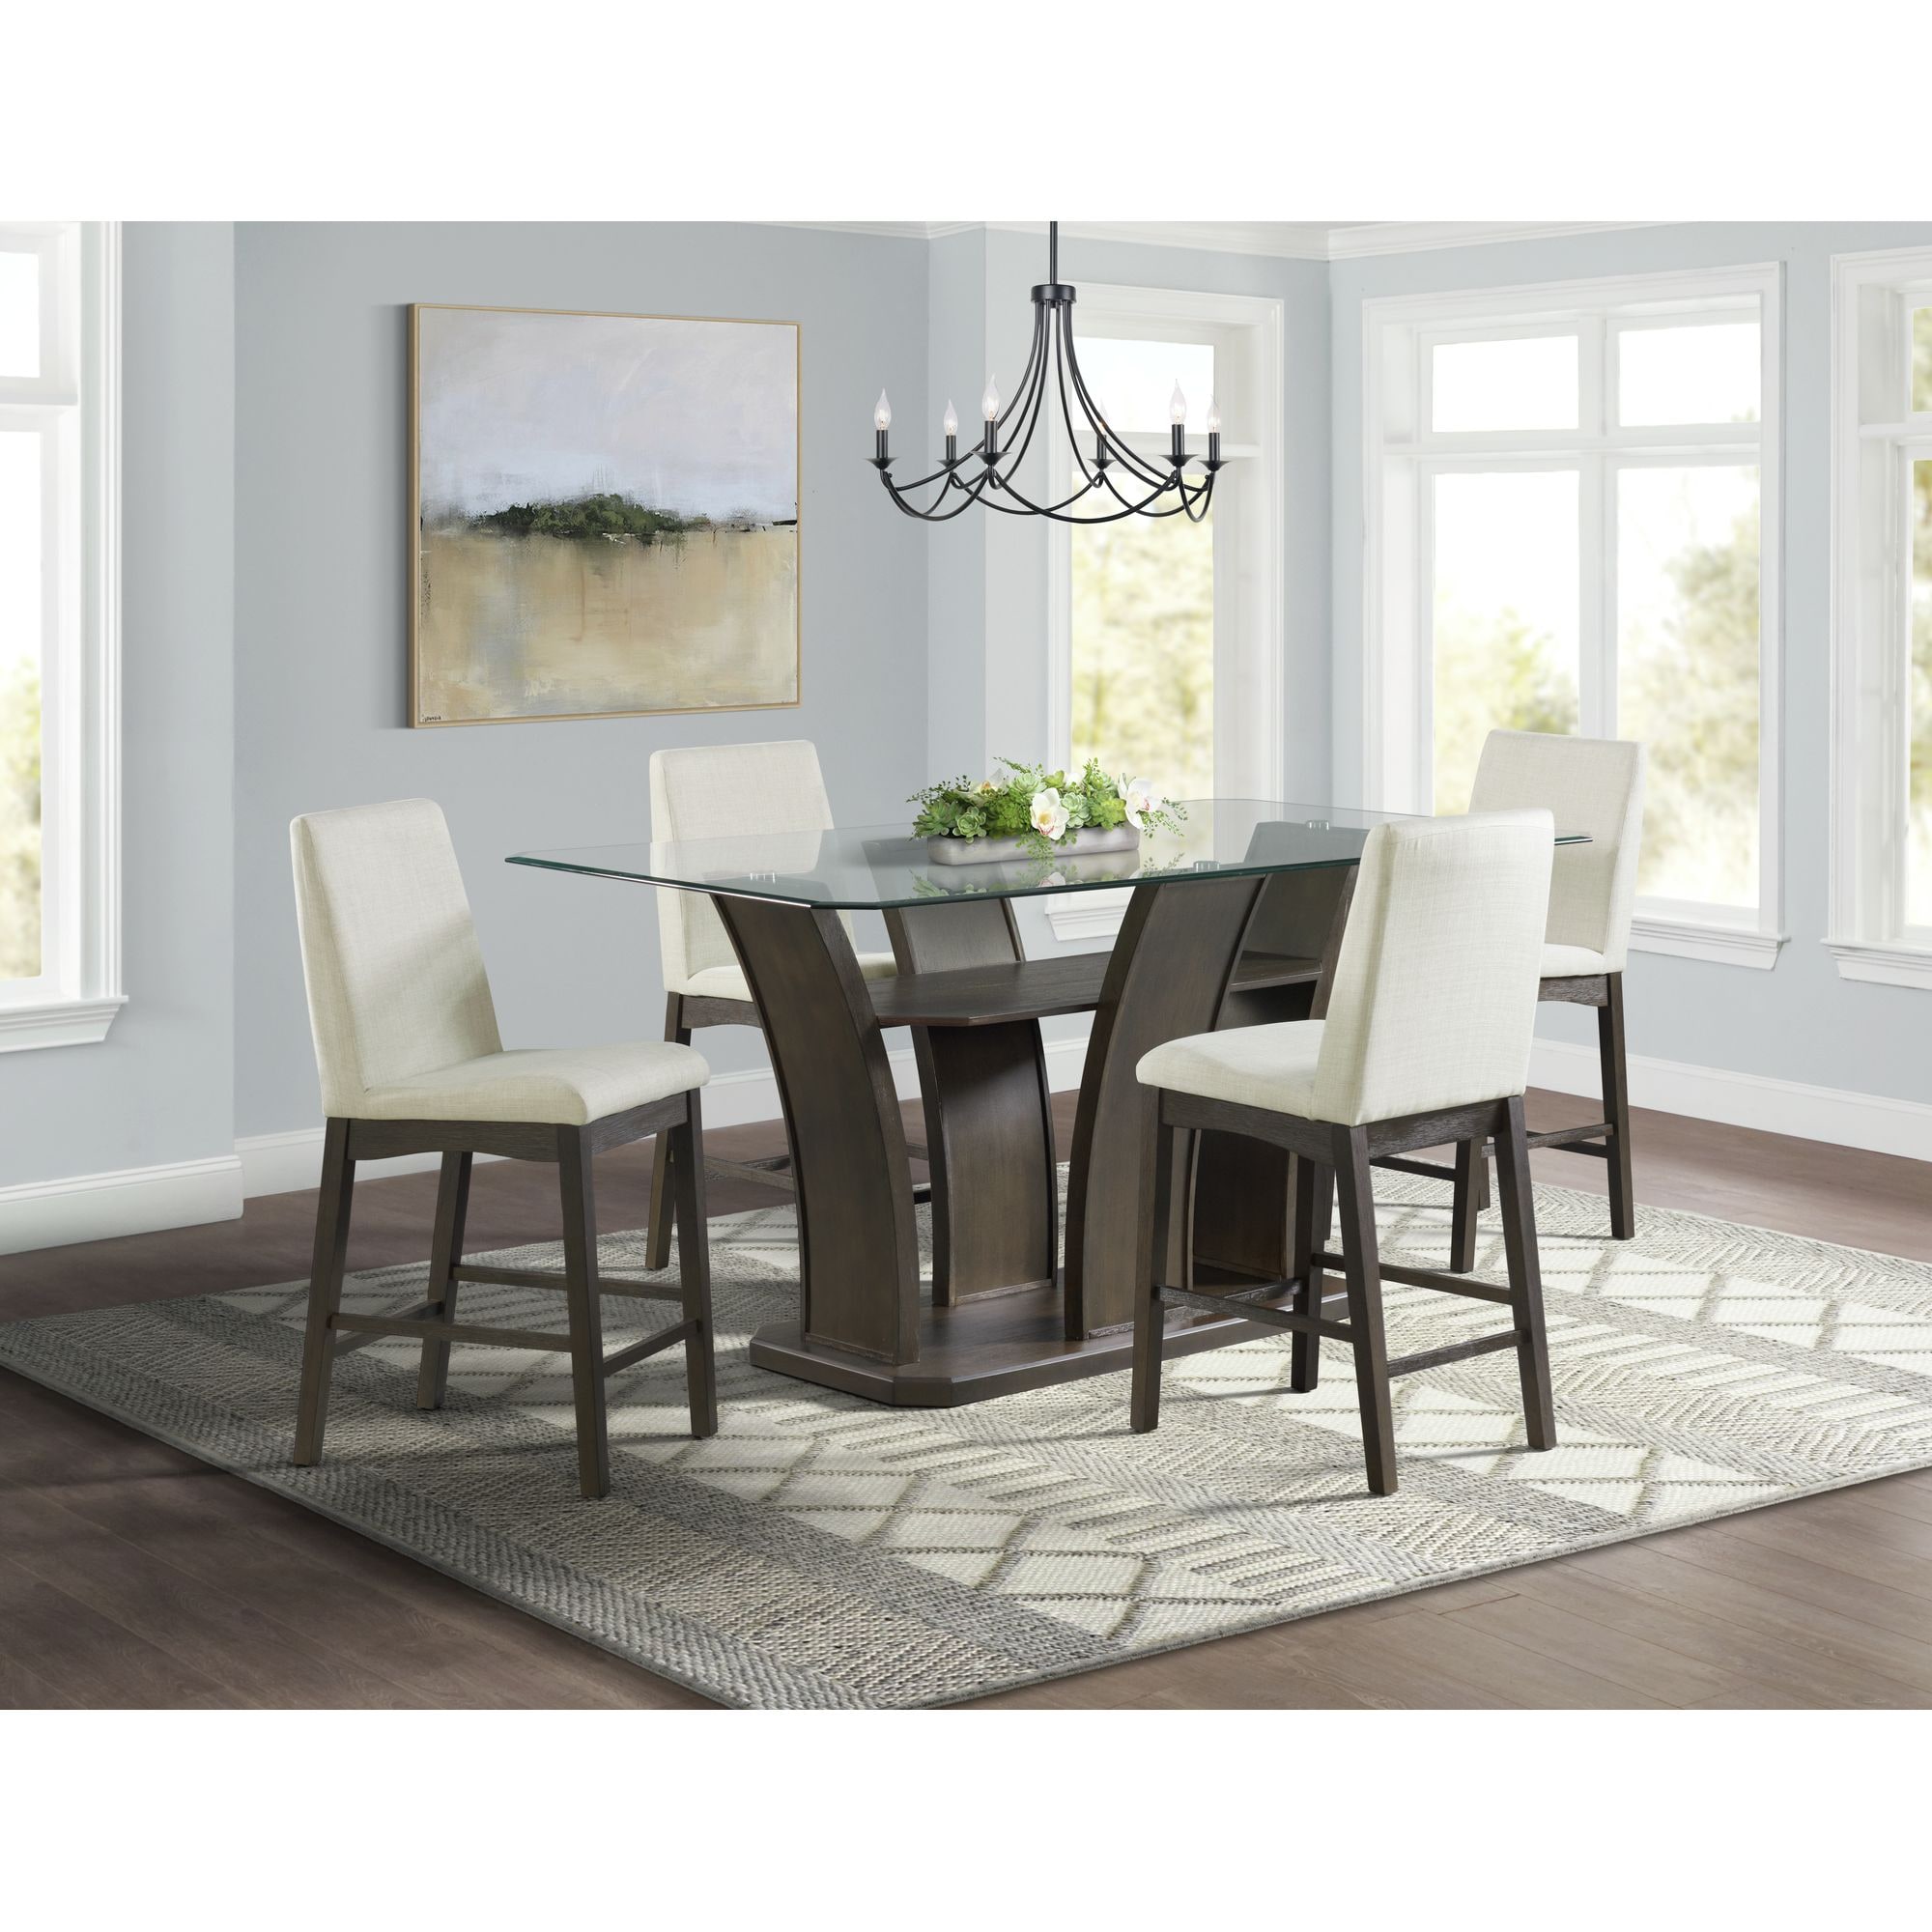 Simms Walnut Transitional Dining Room Set with Rectangular Table (Seats 4) in Gray | - Picket House Furnishings DPR5005PCDRC